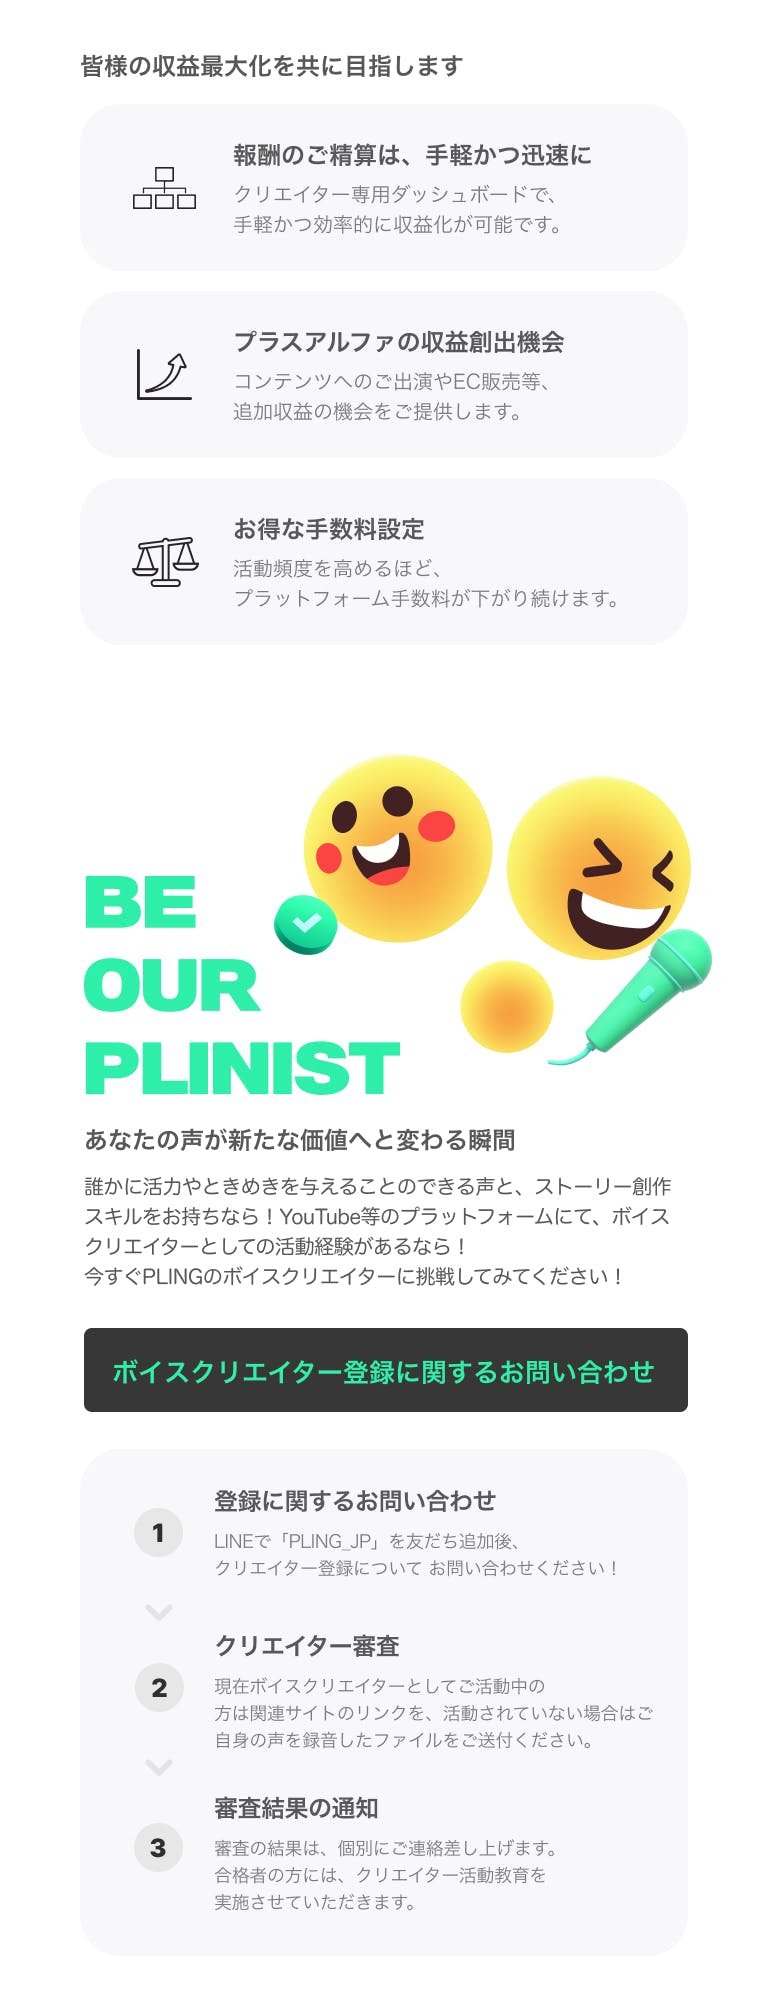 BE OUR PLINIST